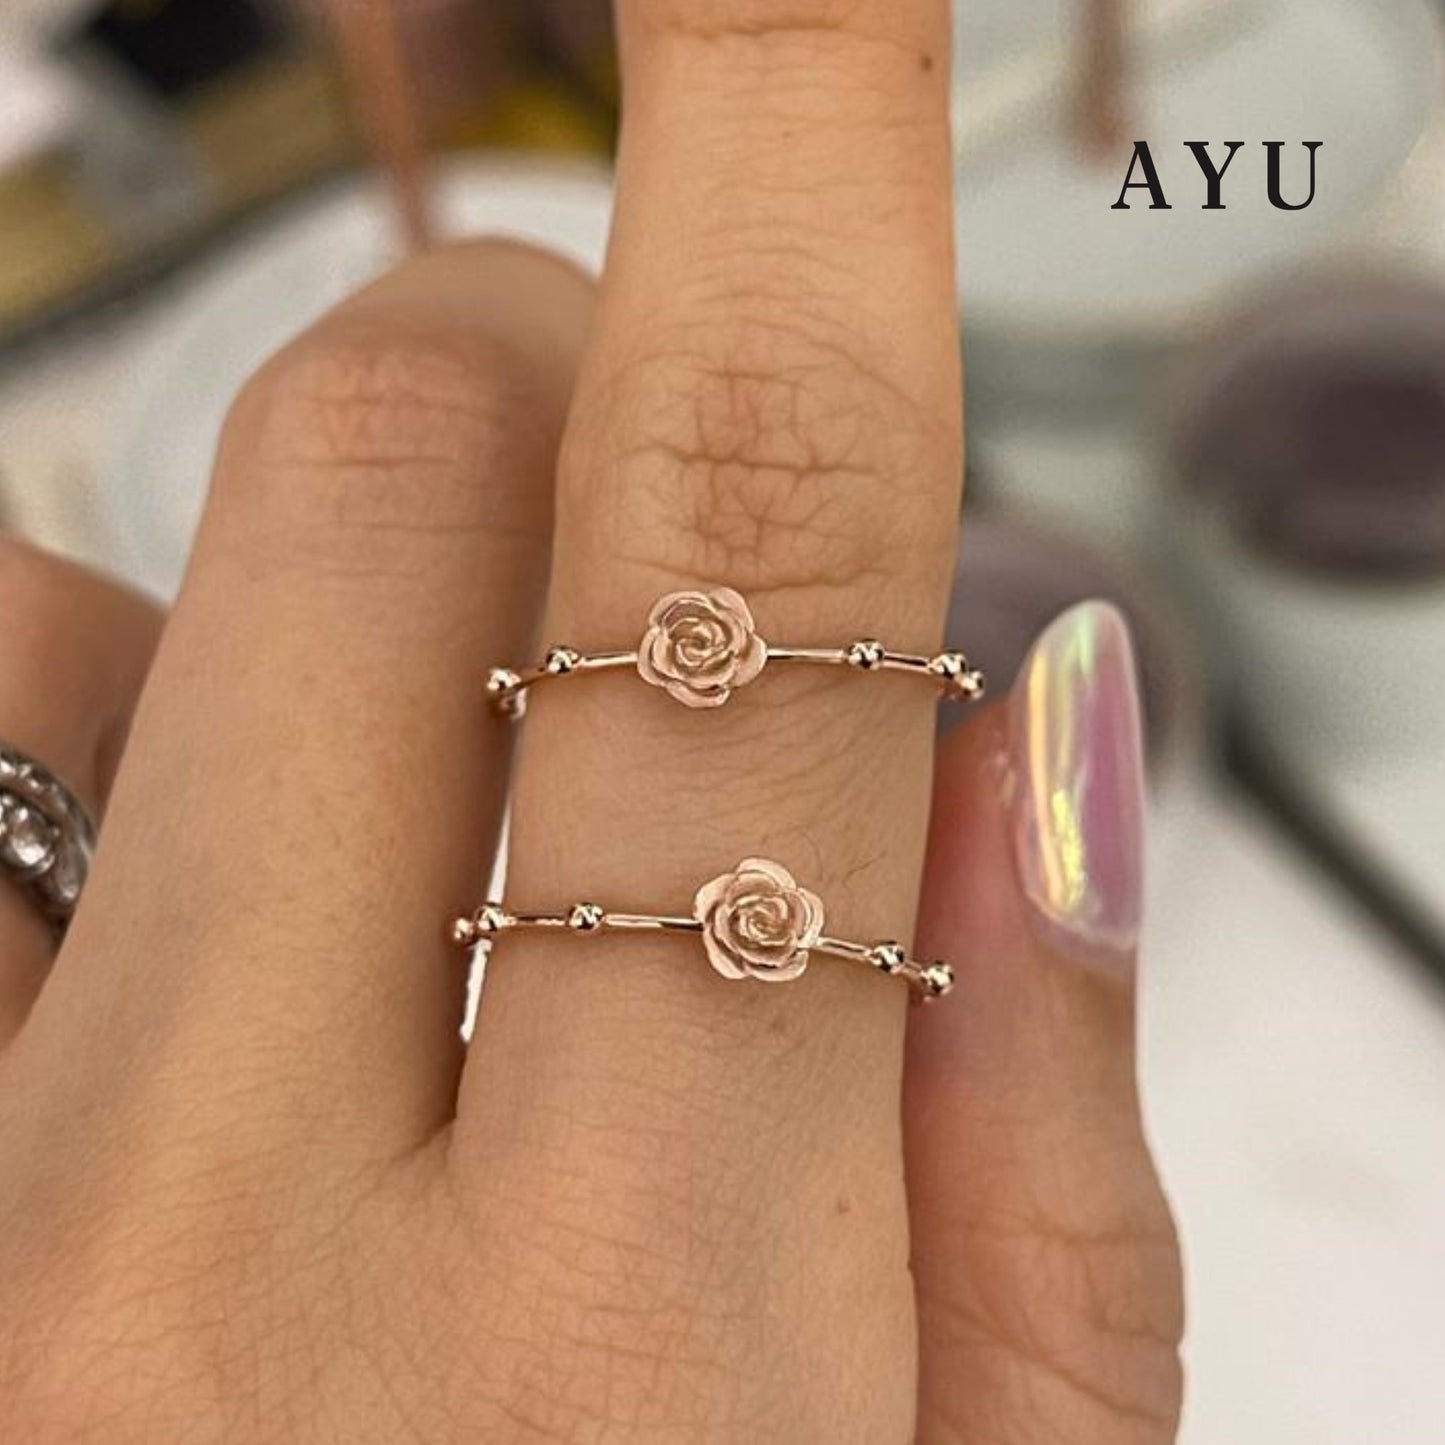 AYU Golden Rose With Spaced Pepper Ring 17K Rose Gold